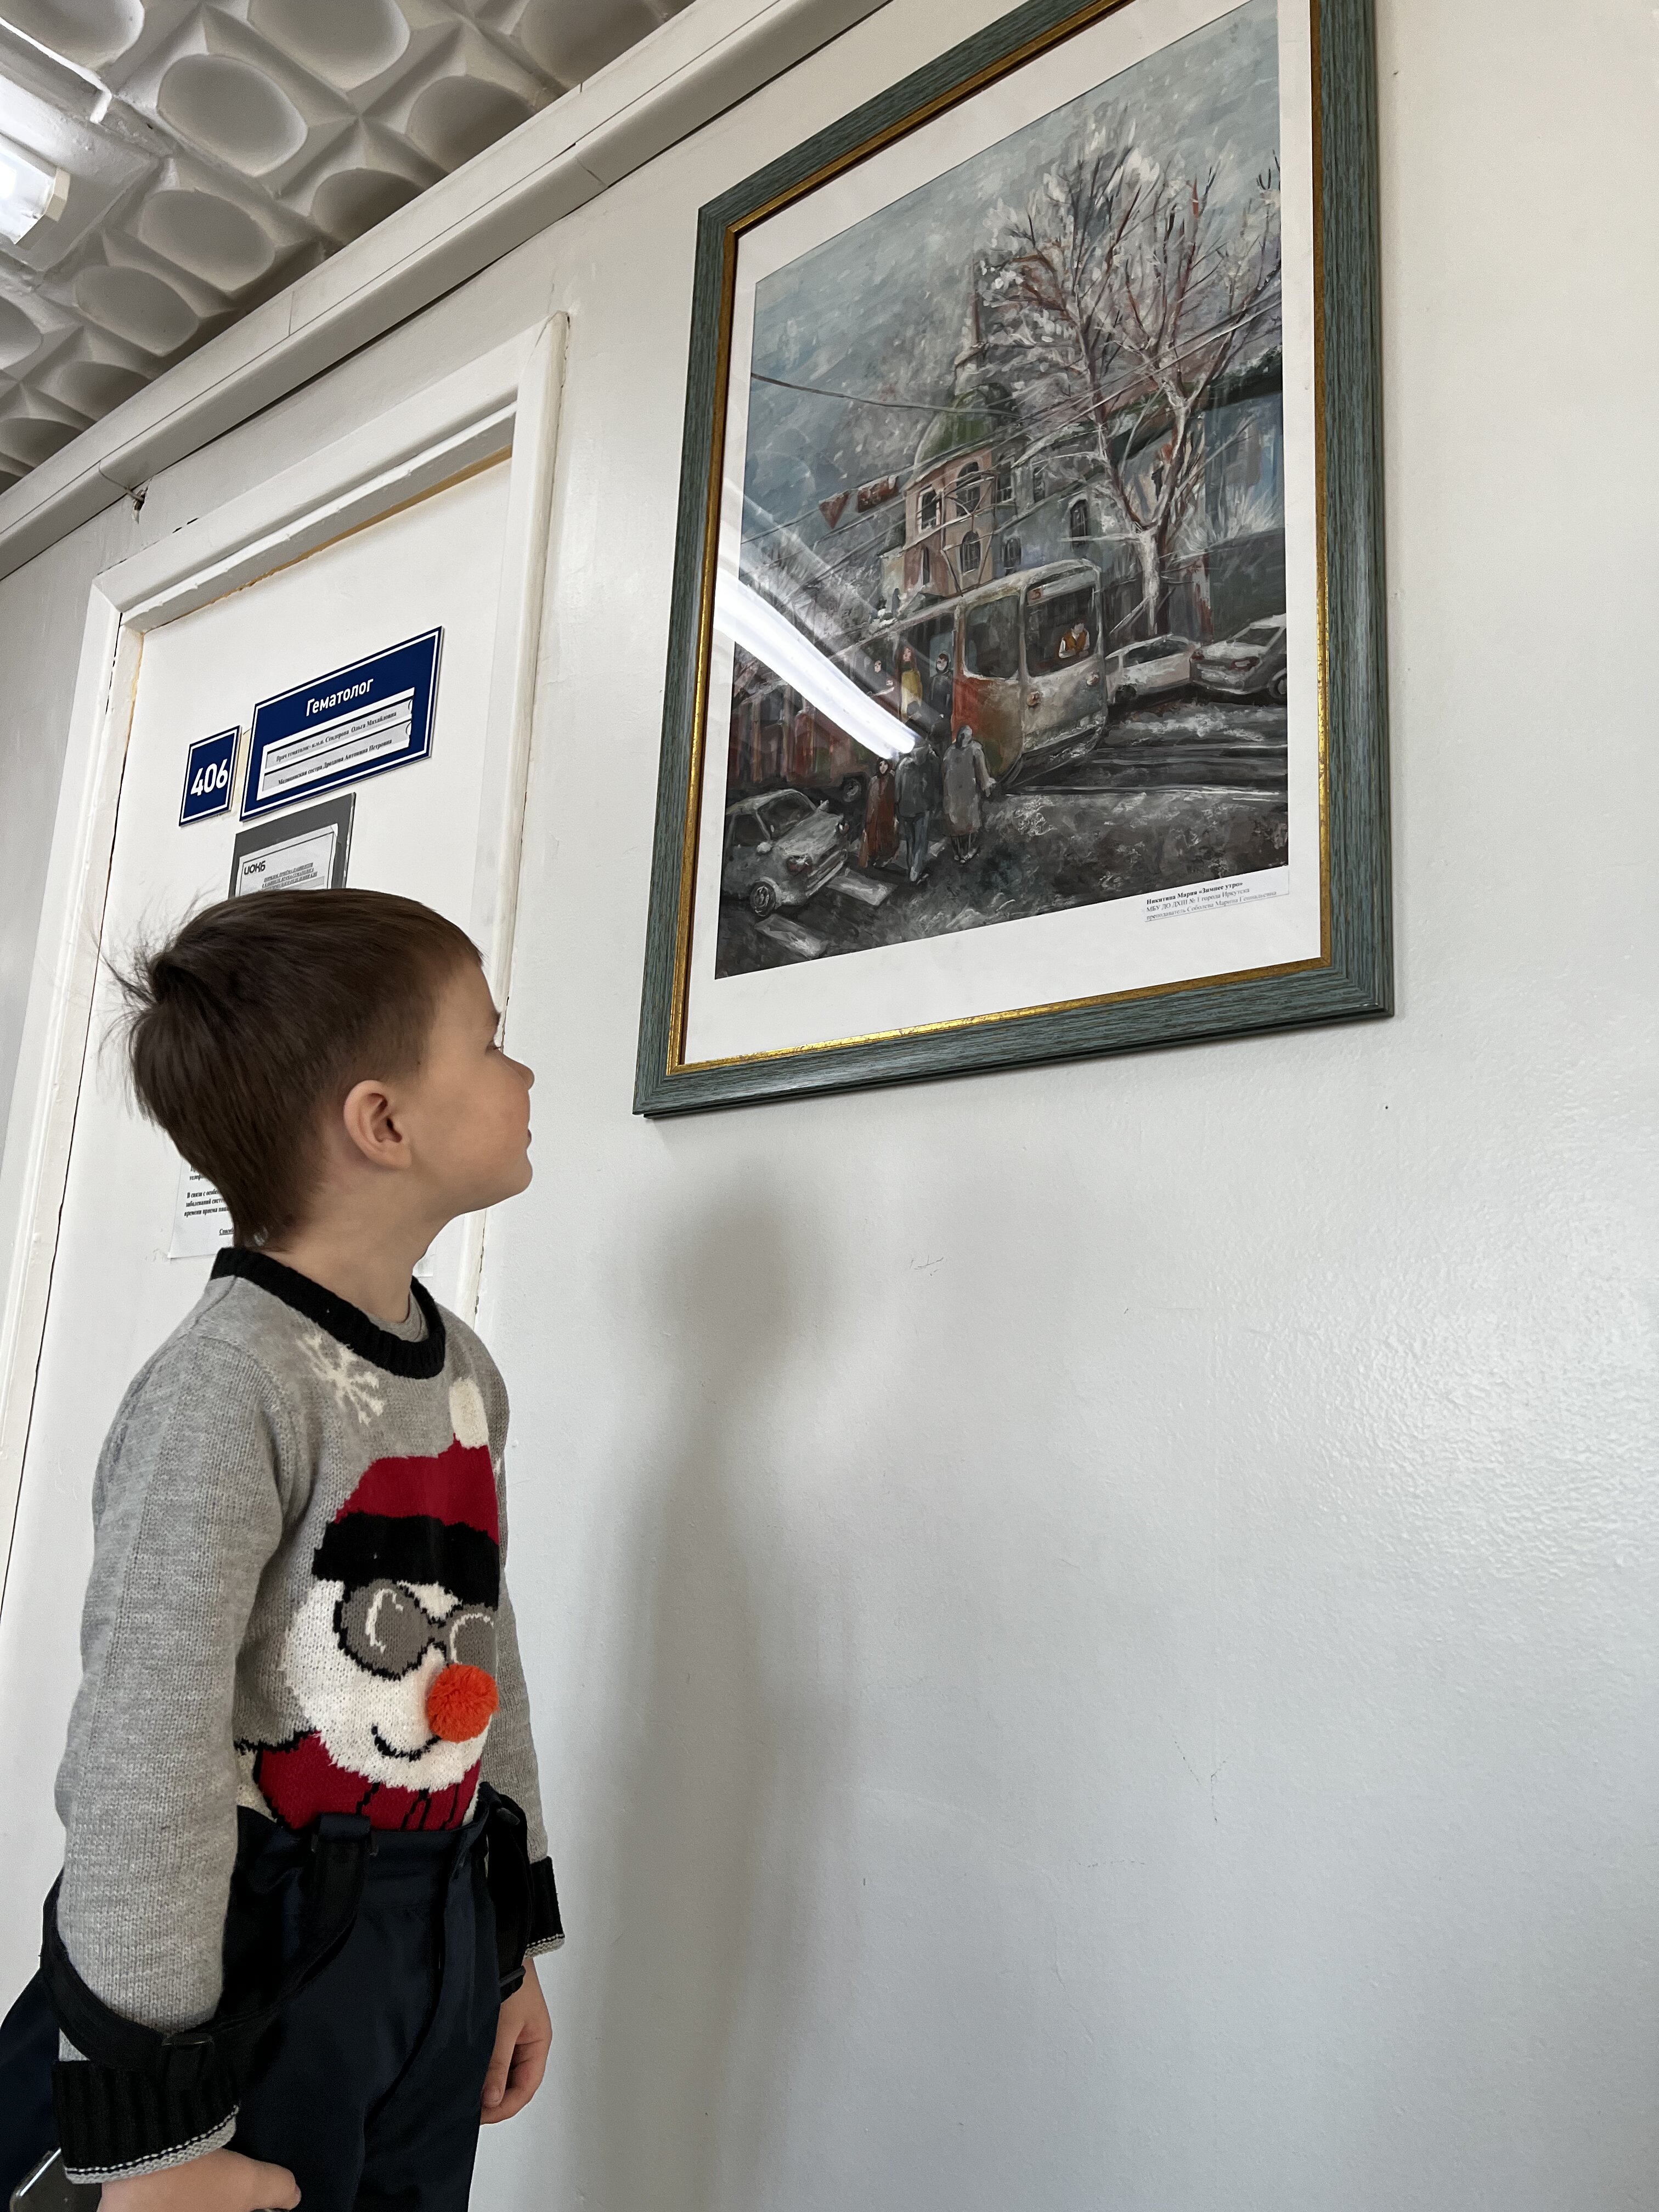 Exhibition of children's works within the walls of our hospital